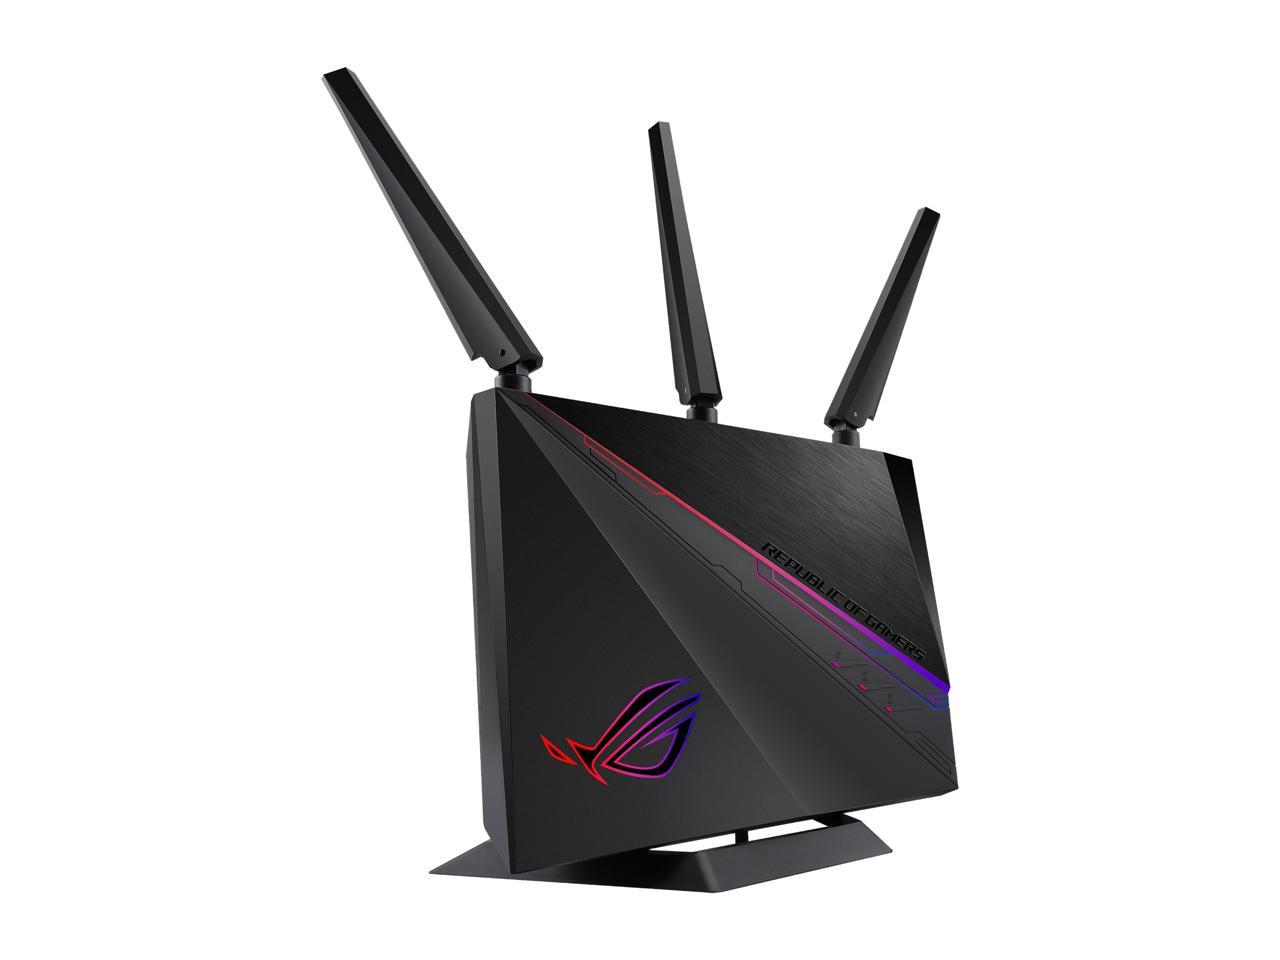 ASUS ROG (GT-AC2900) Dual-Band Wireless Gigabit Wi-Fi Gaming Router - GeForce NOW Optimization with Triple-Level Game Accelerati